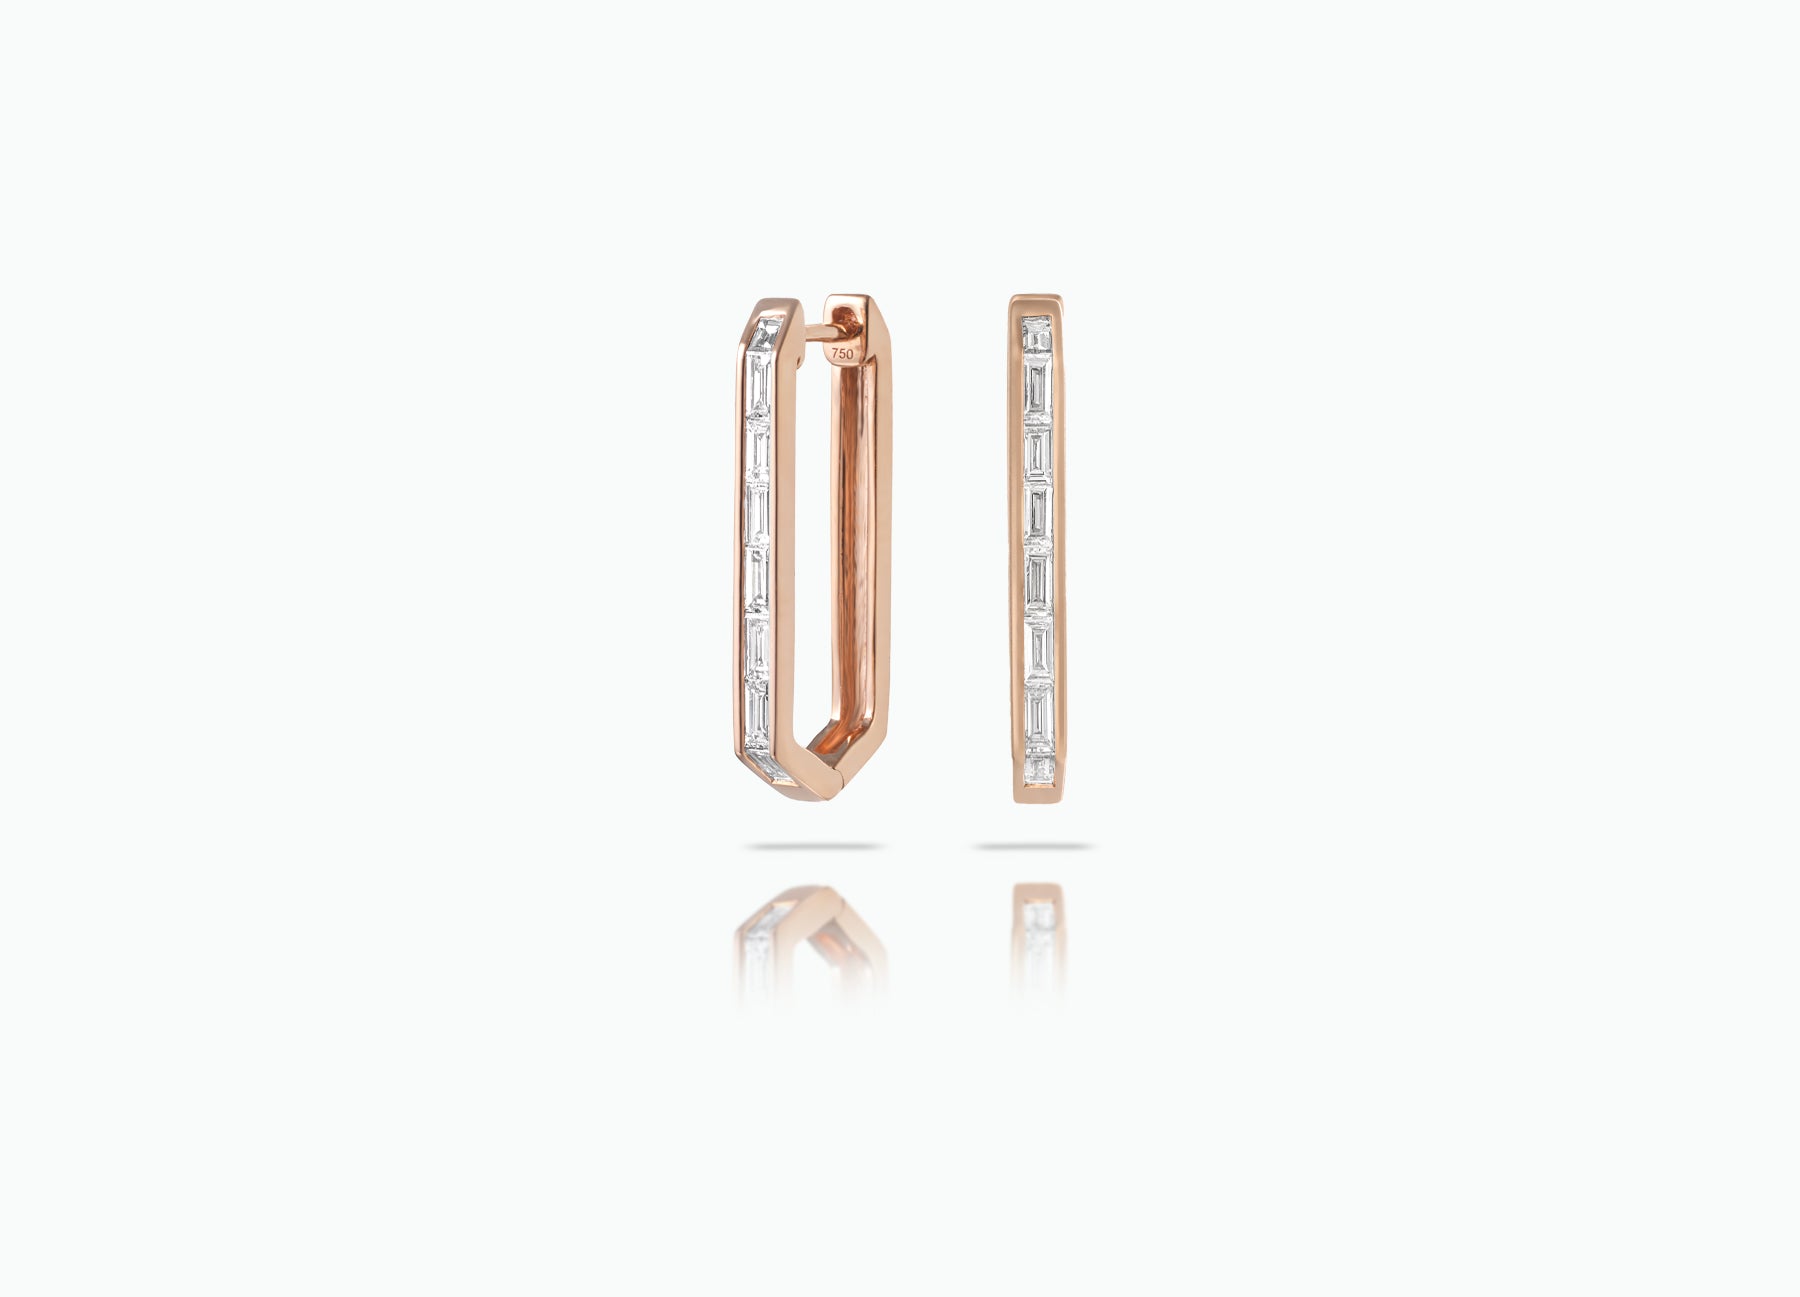 Elongated Huggie earrings made from rose, yellow or white 18k Gold. Each features a row of baguette-cut GVS white Diamonds.